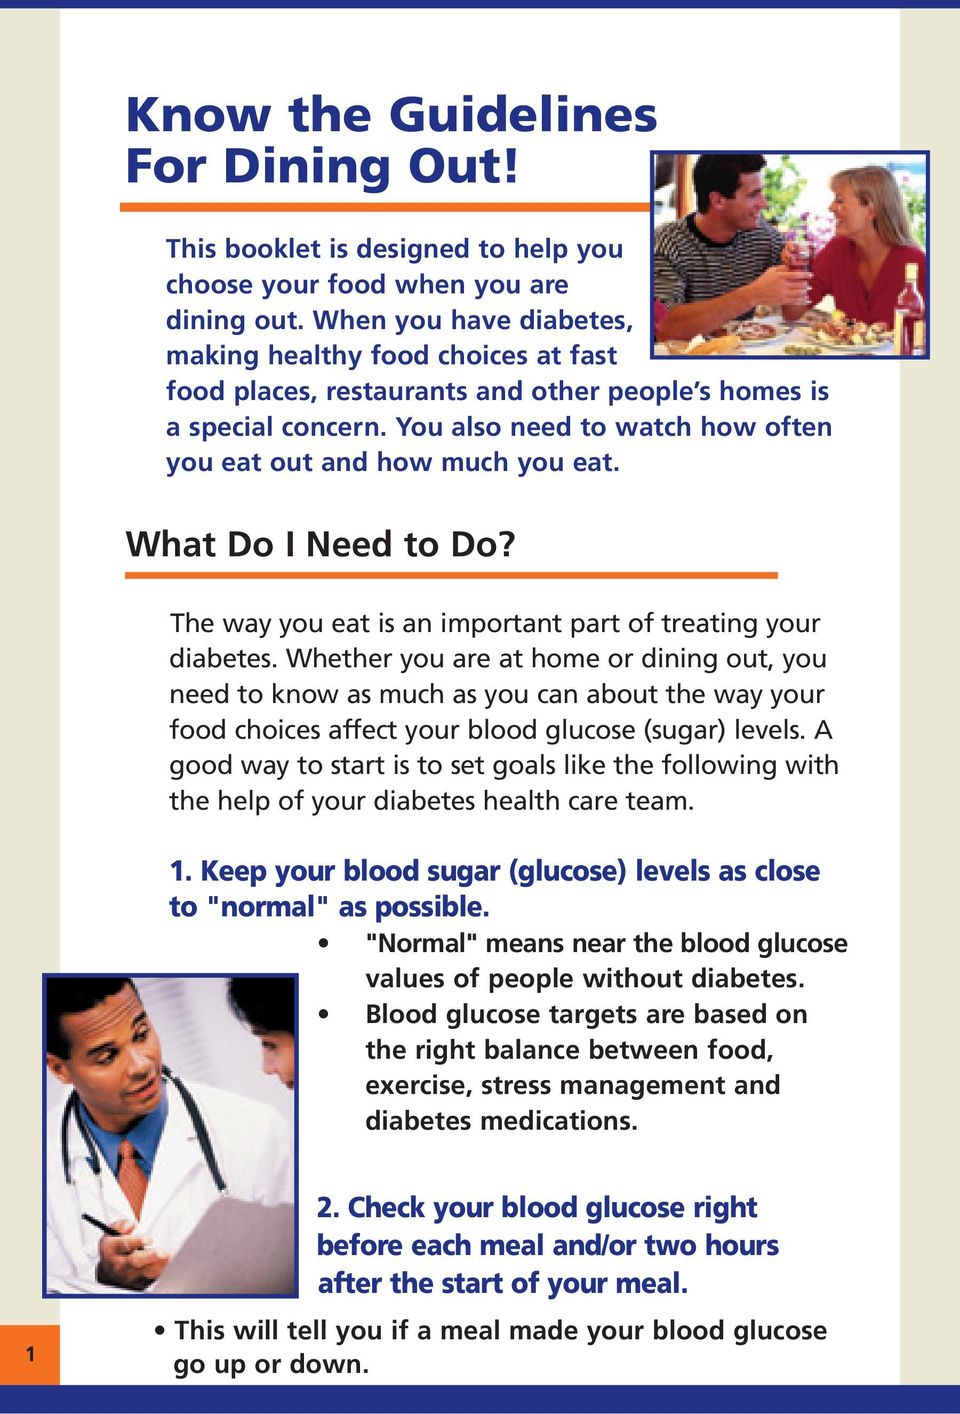 What Do I Need to Do? The way you eat is an important part of treating your diabetes.